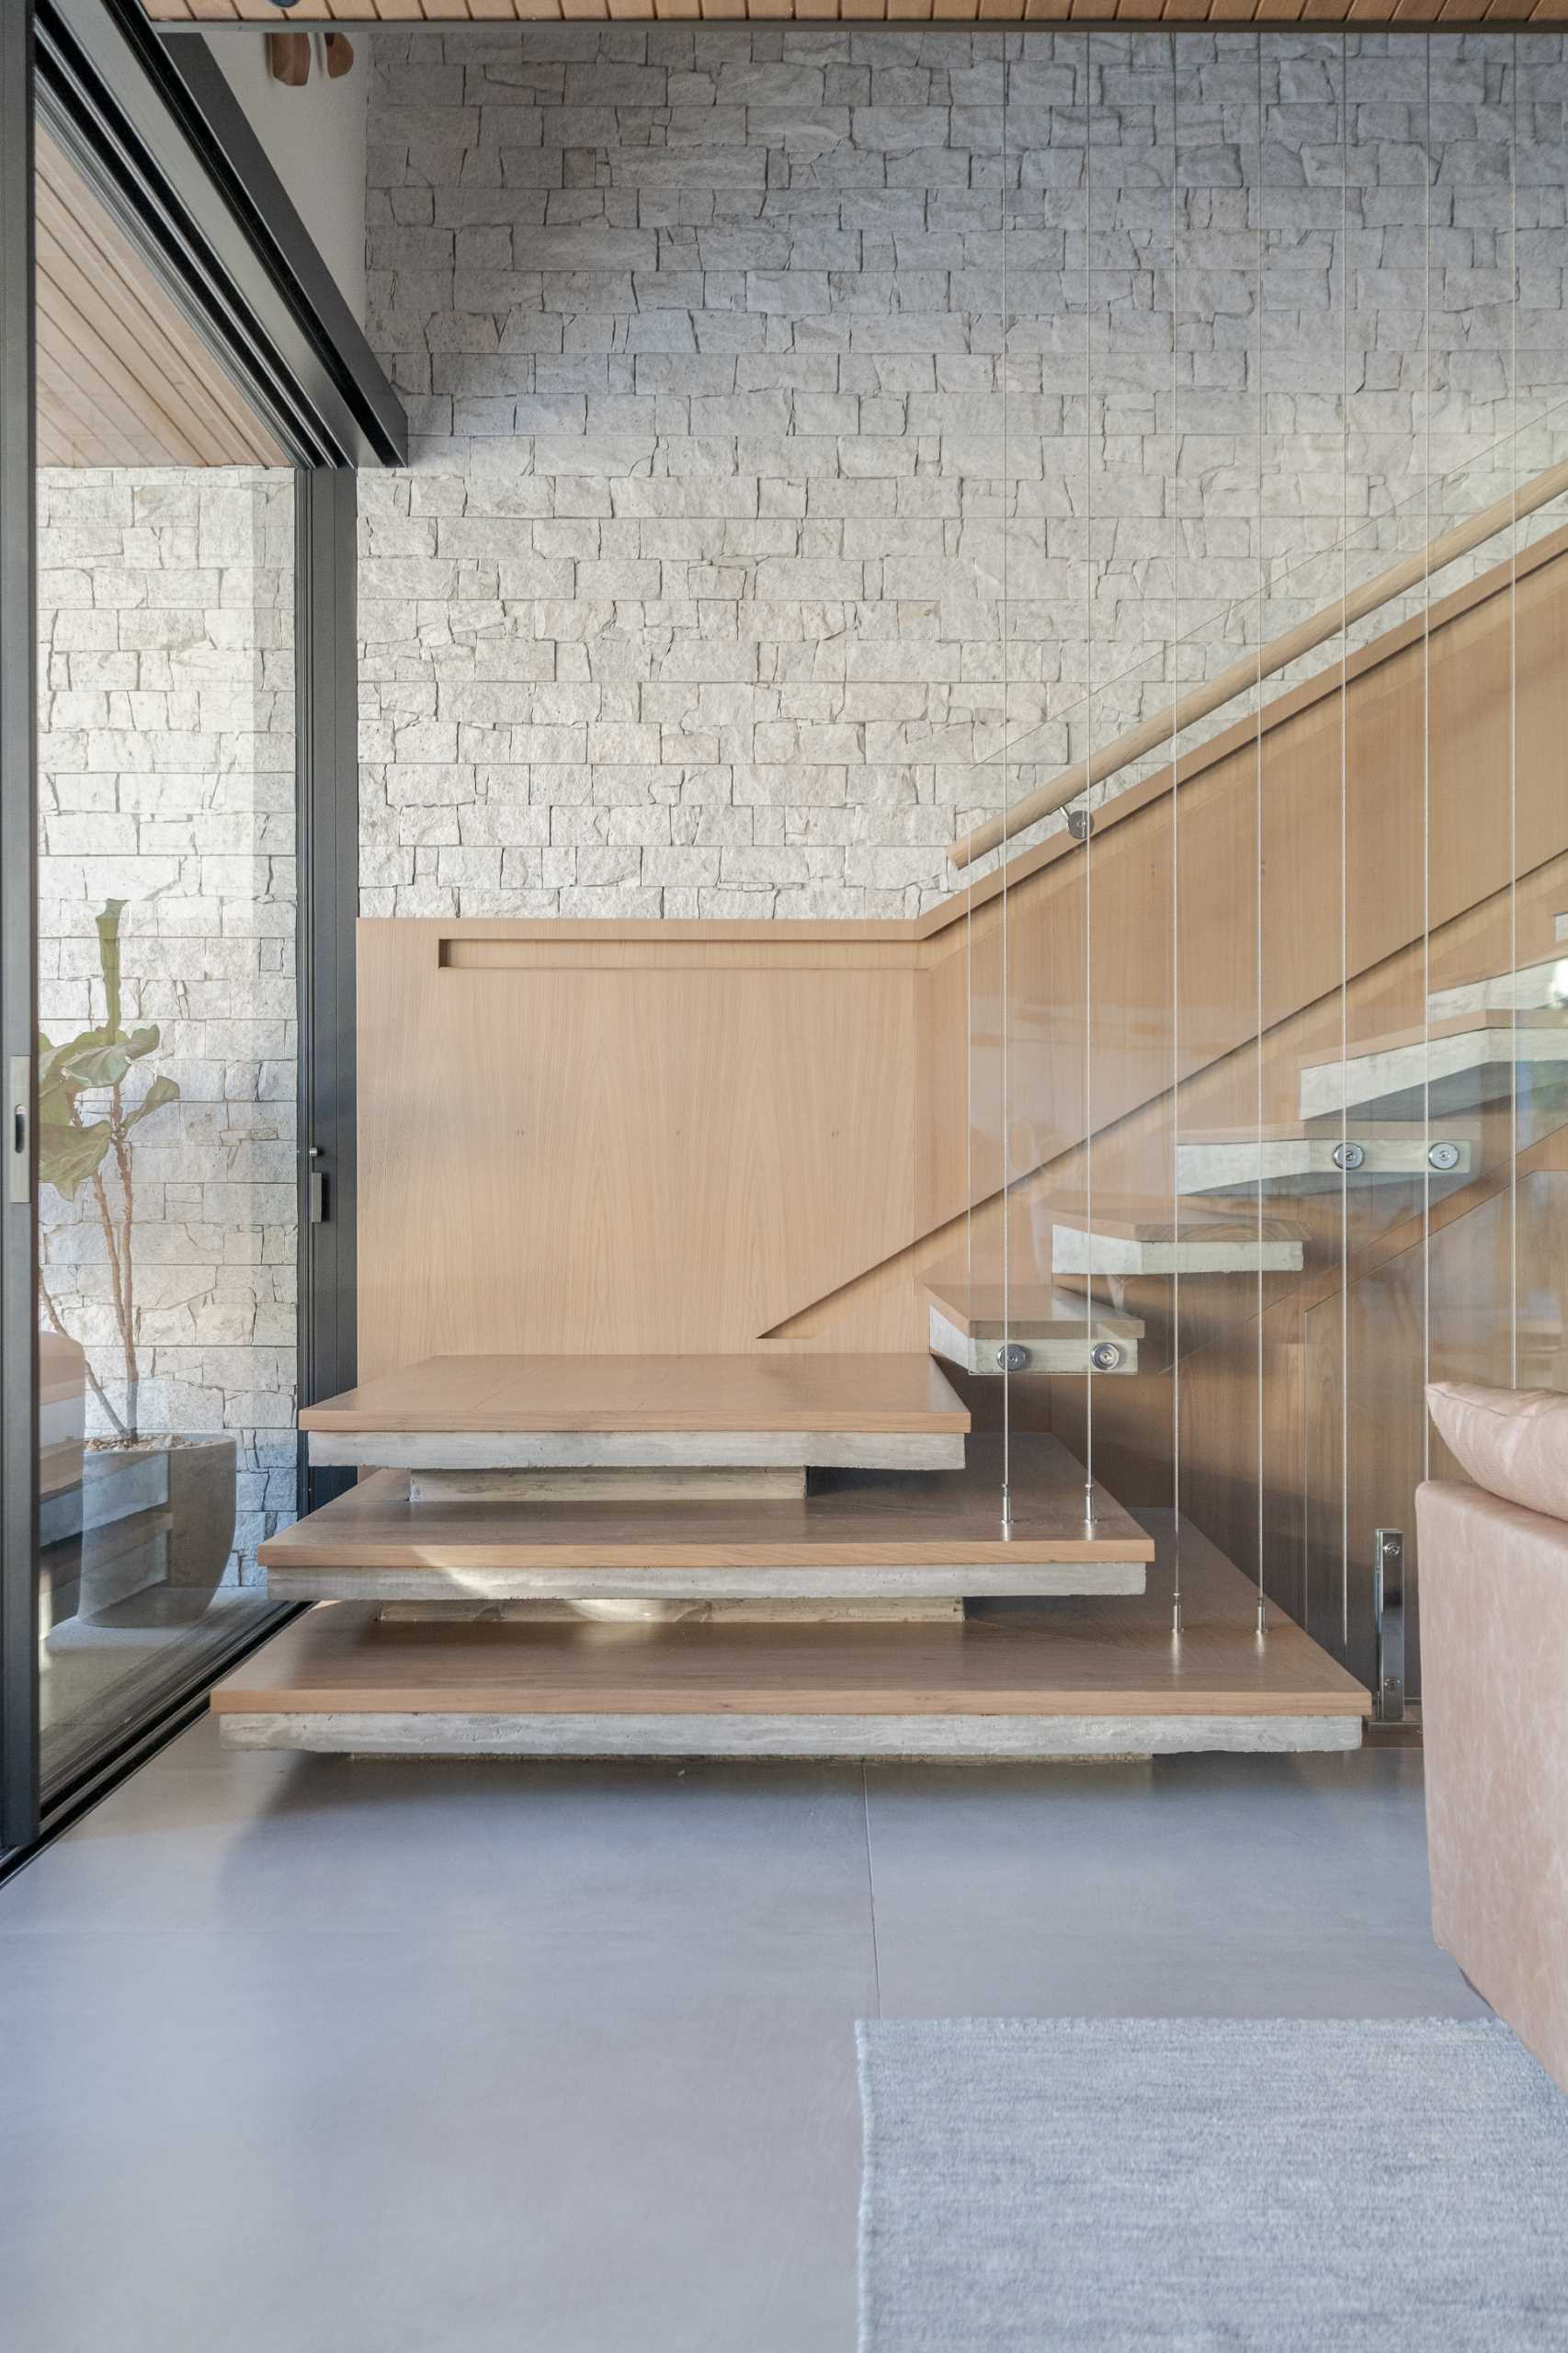 Modern wood and concrete stairs with hidden lighting.